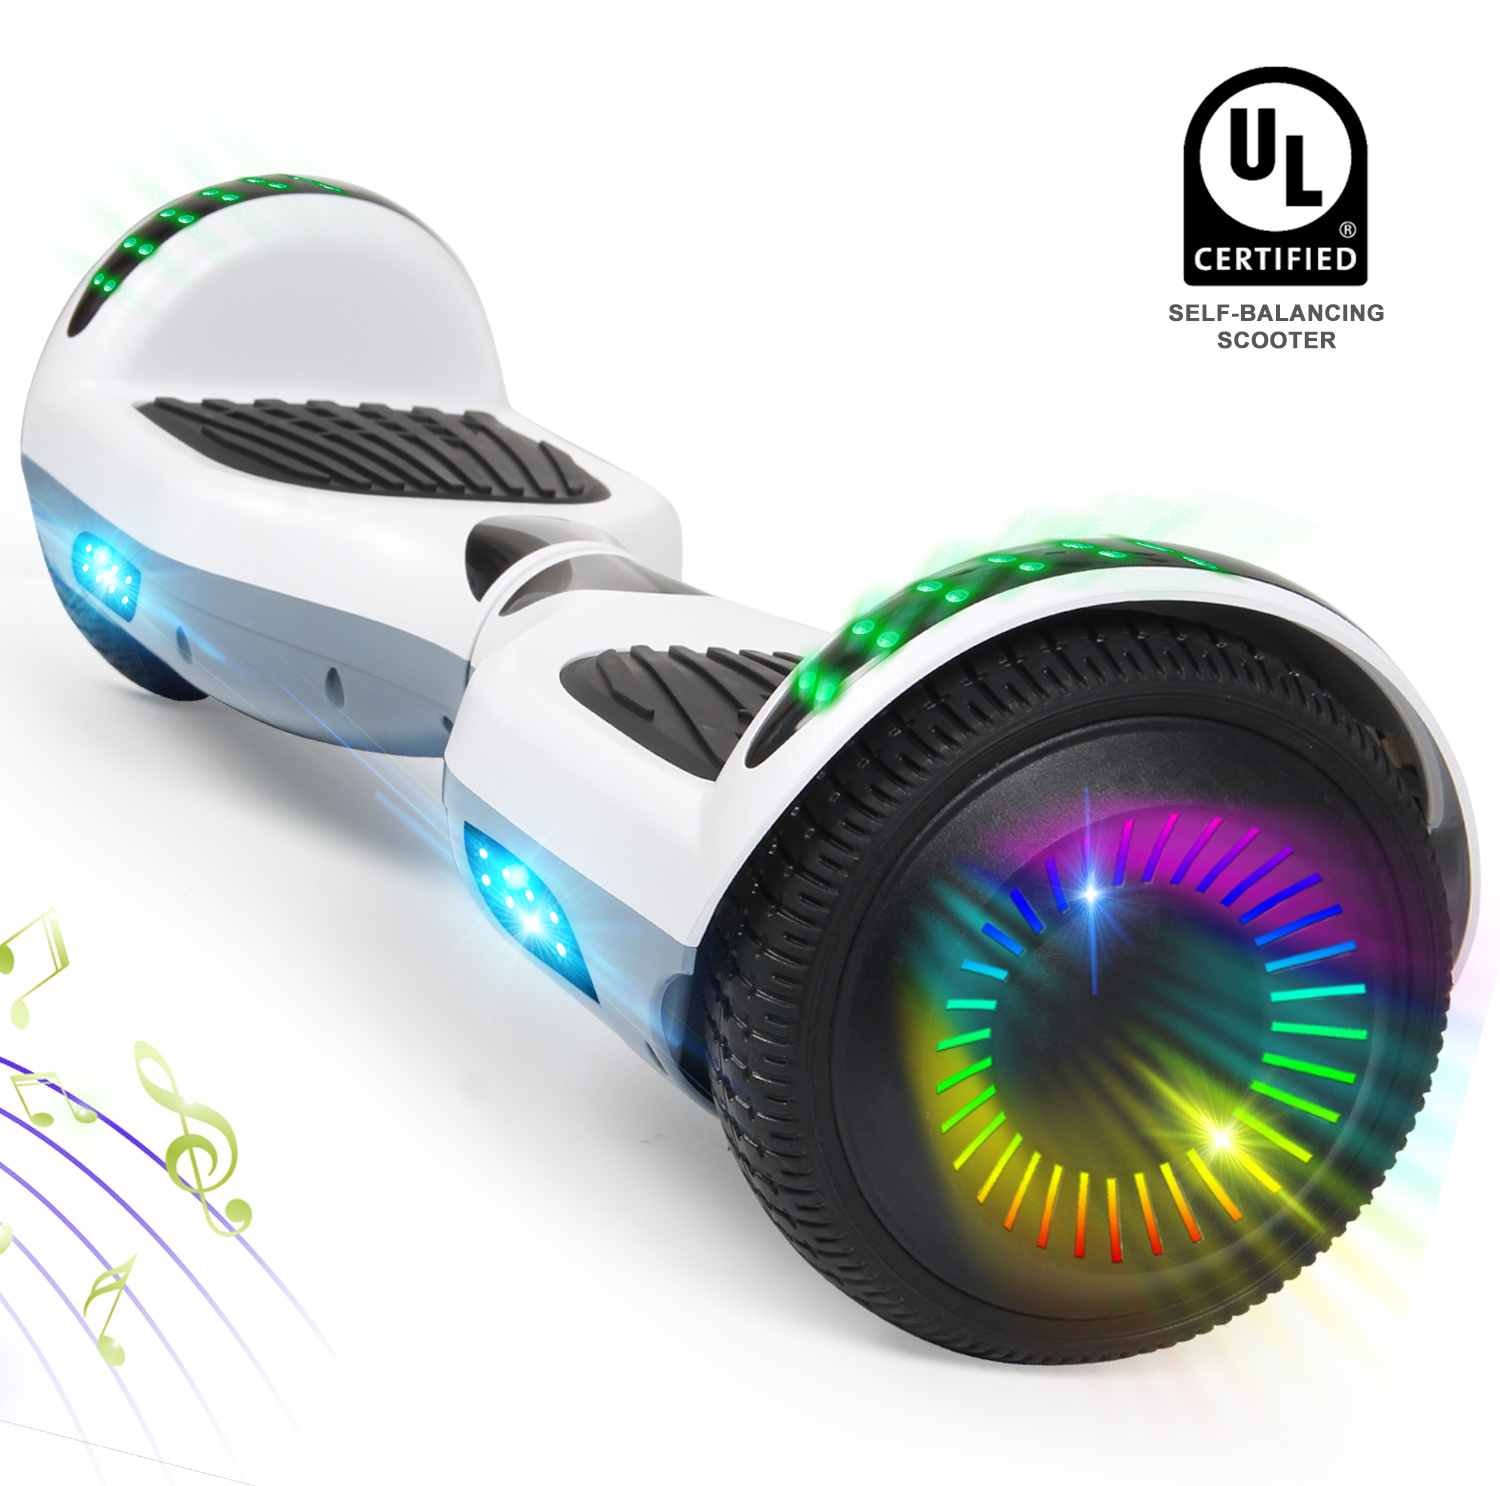 CBD Hoverboard 6.5 inch Self Balancing Hoverboard with LED Lights and Bluetooth Hoverboard for Adults and Kids Gift White - image 1 of 7